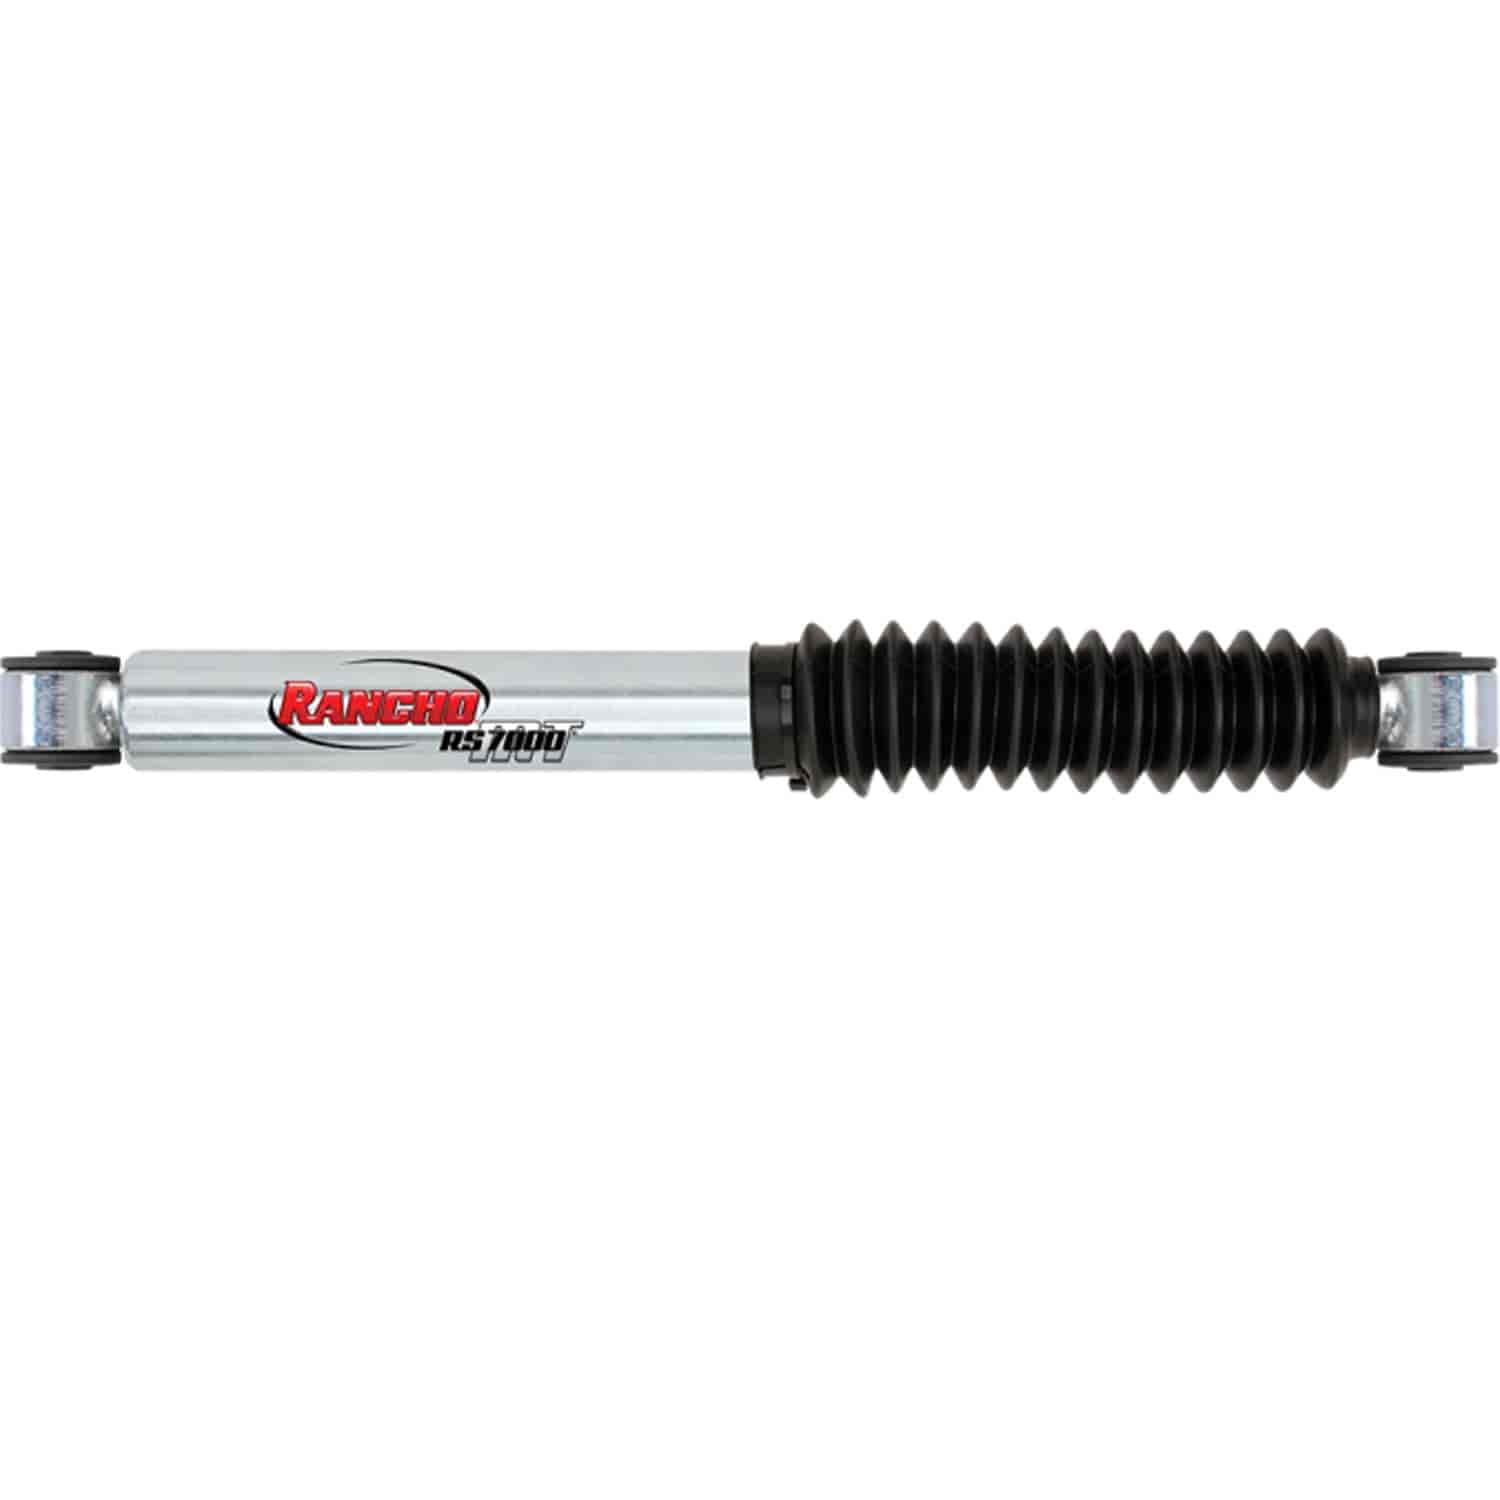 RS7000MT Front Strut Fits Chevy Avalanche 2500 and